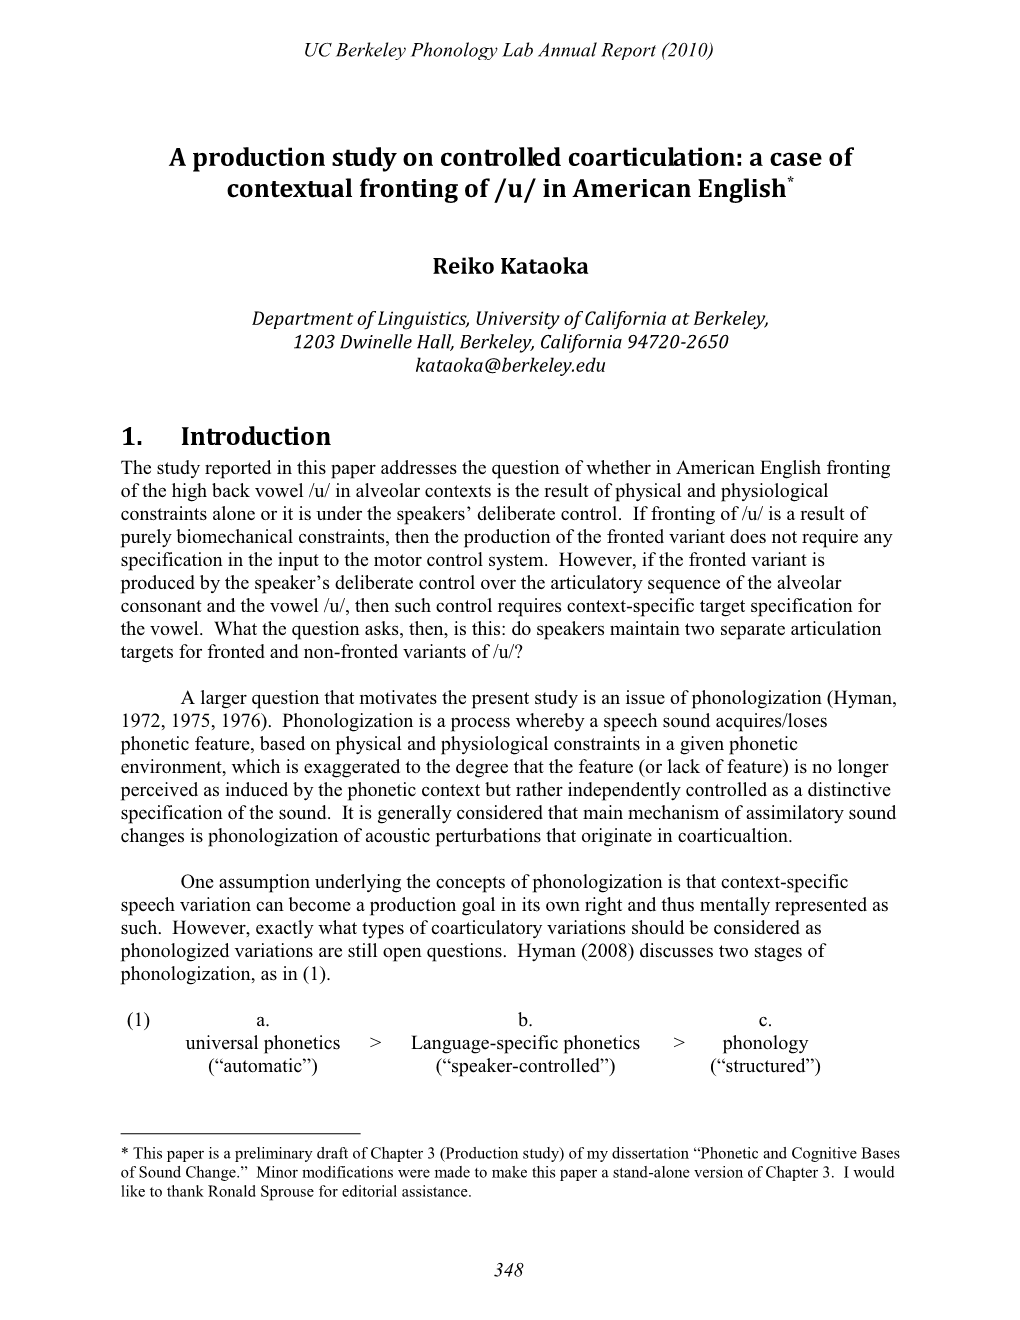 A Production Study on Controlled Coarticulation: a Case of Contextual Fronting of /U/ in American English*